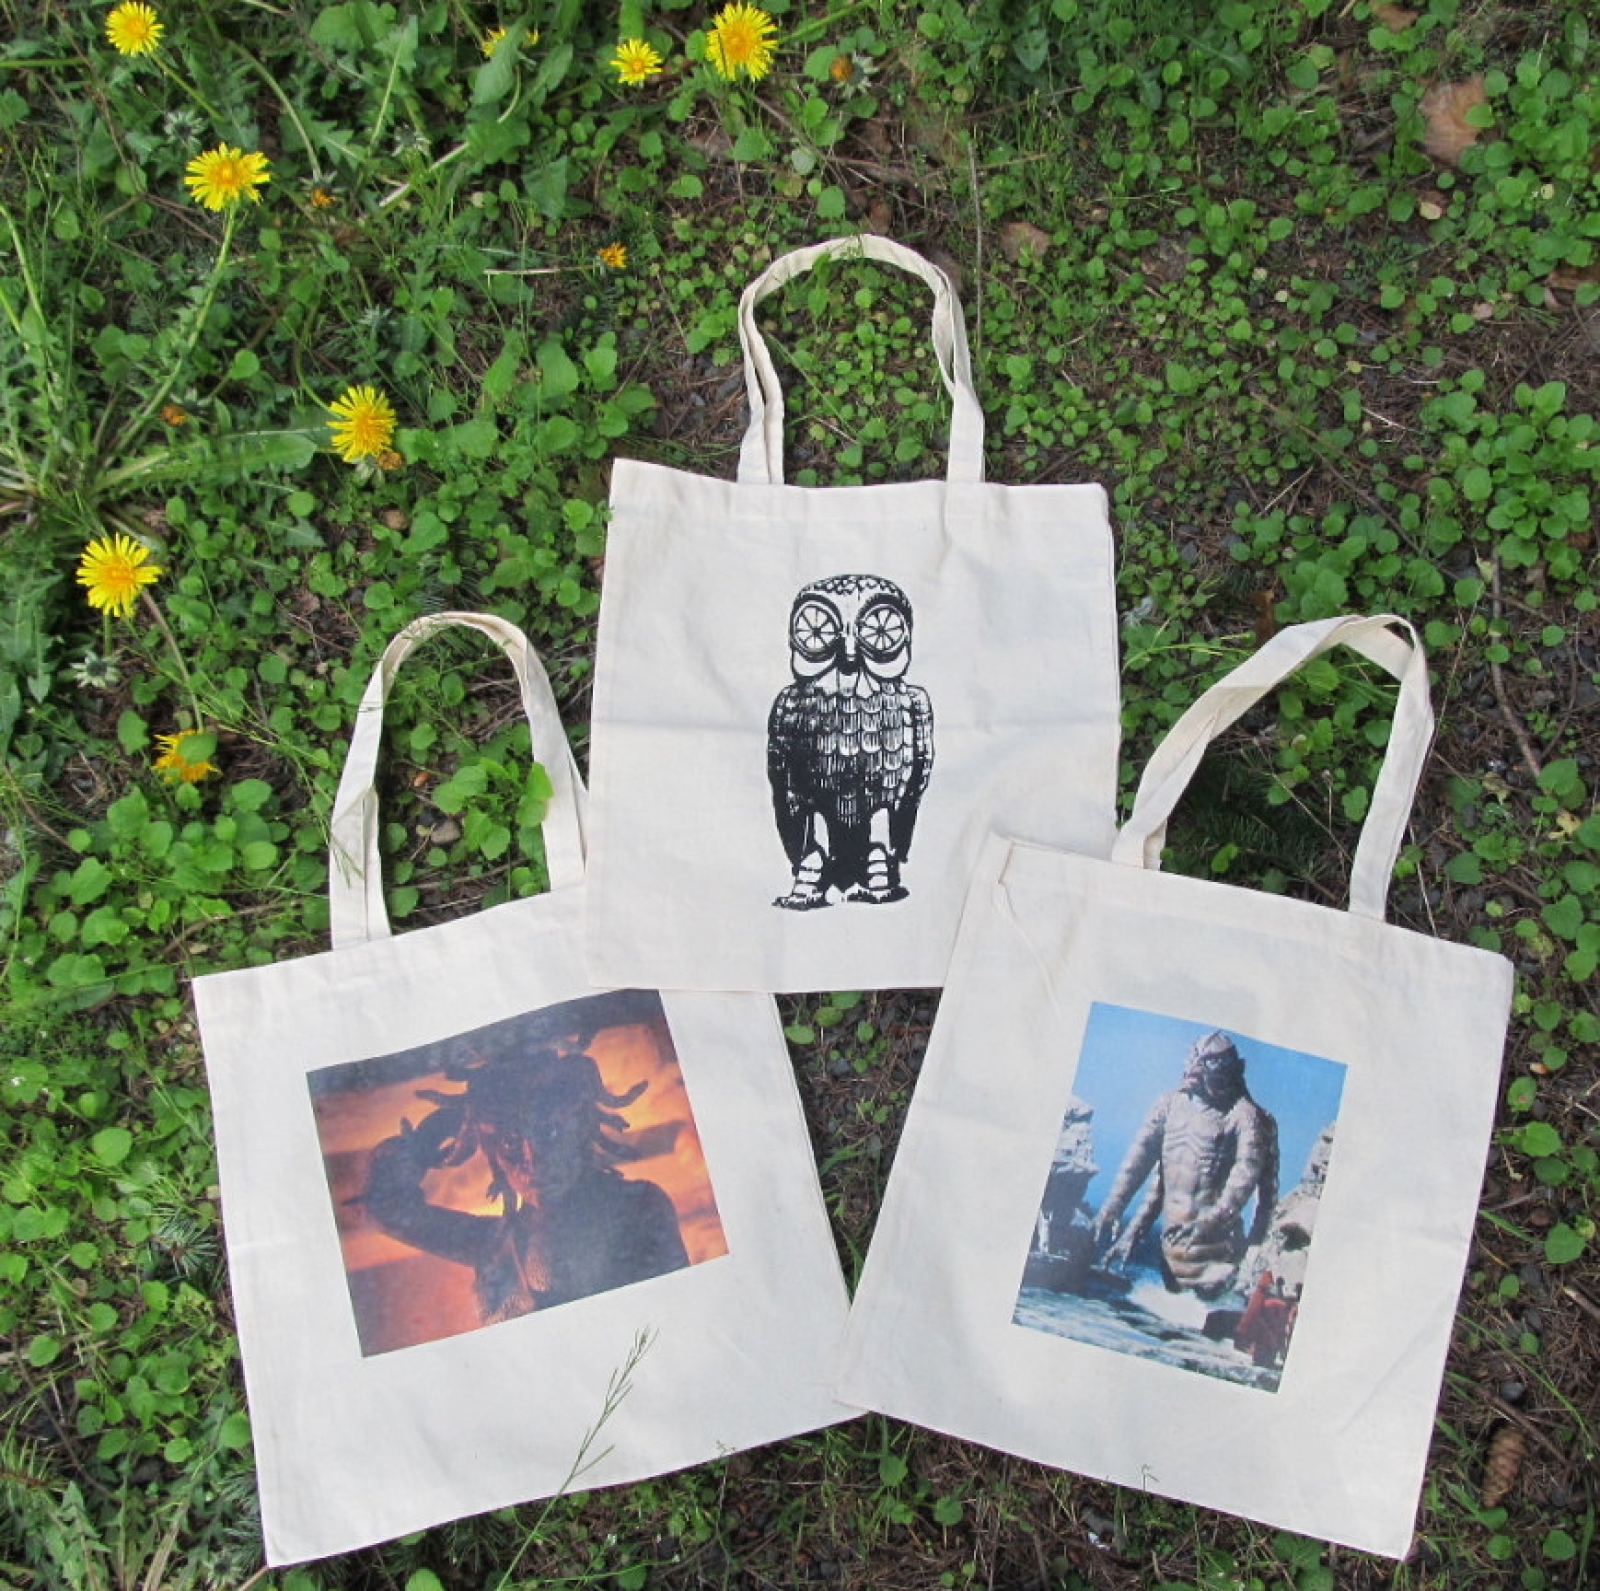 Valg Tremble Trække på Custom Print Tote Bags - Any Design You Want on Sturdy, Natural, Cotton Bags  - off white, beige, screenprint, punk, nature, anarchy prints | Hootennany!  - Screenprint Punk Patches, Shirts, Underwear, & More